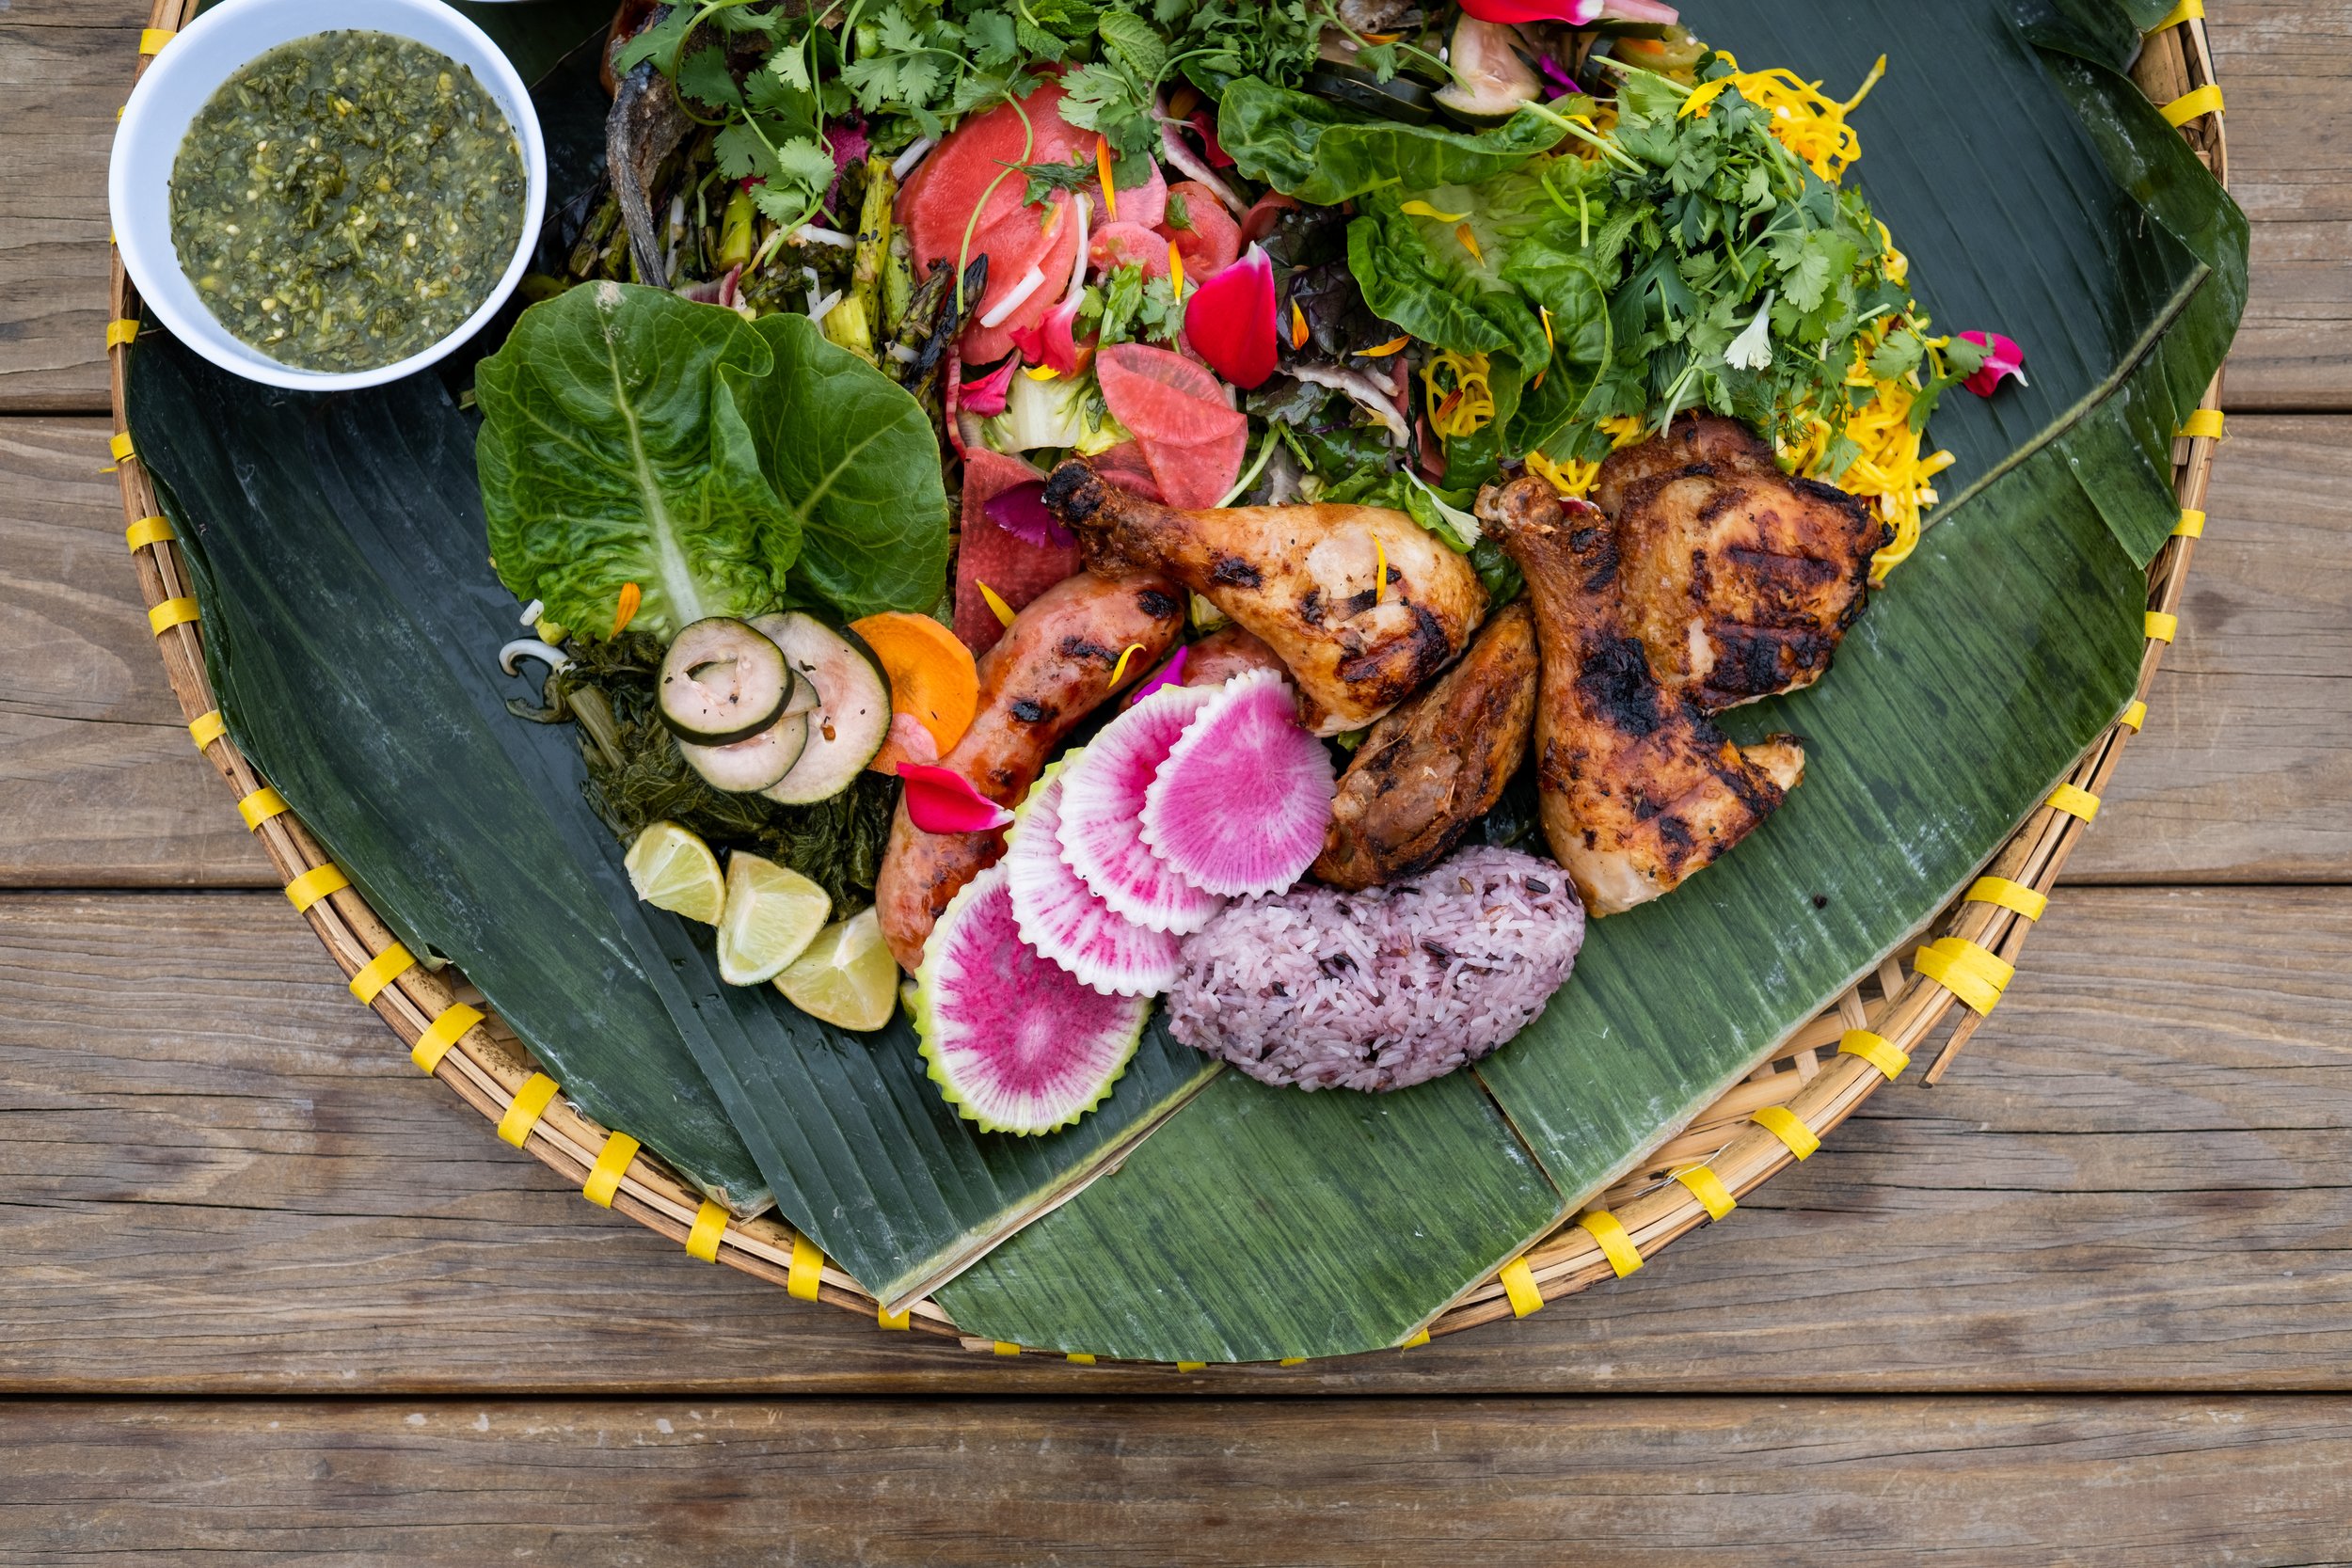 A circular woven bamboo tray lined with banana leaves holds a colorful variety of meats and vegetables as well as purple sticky rice. It's a shared plate served at the Union Hmong Kitchen in Minneapolis, MN.